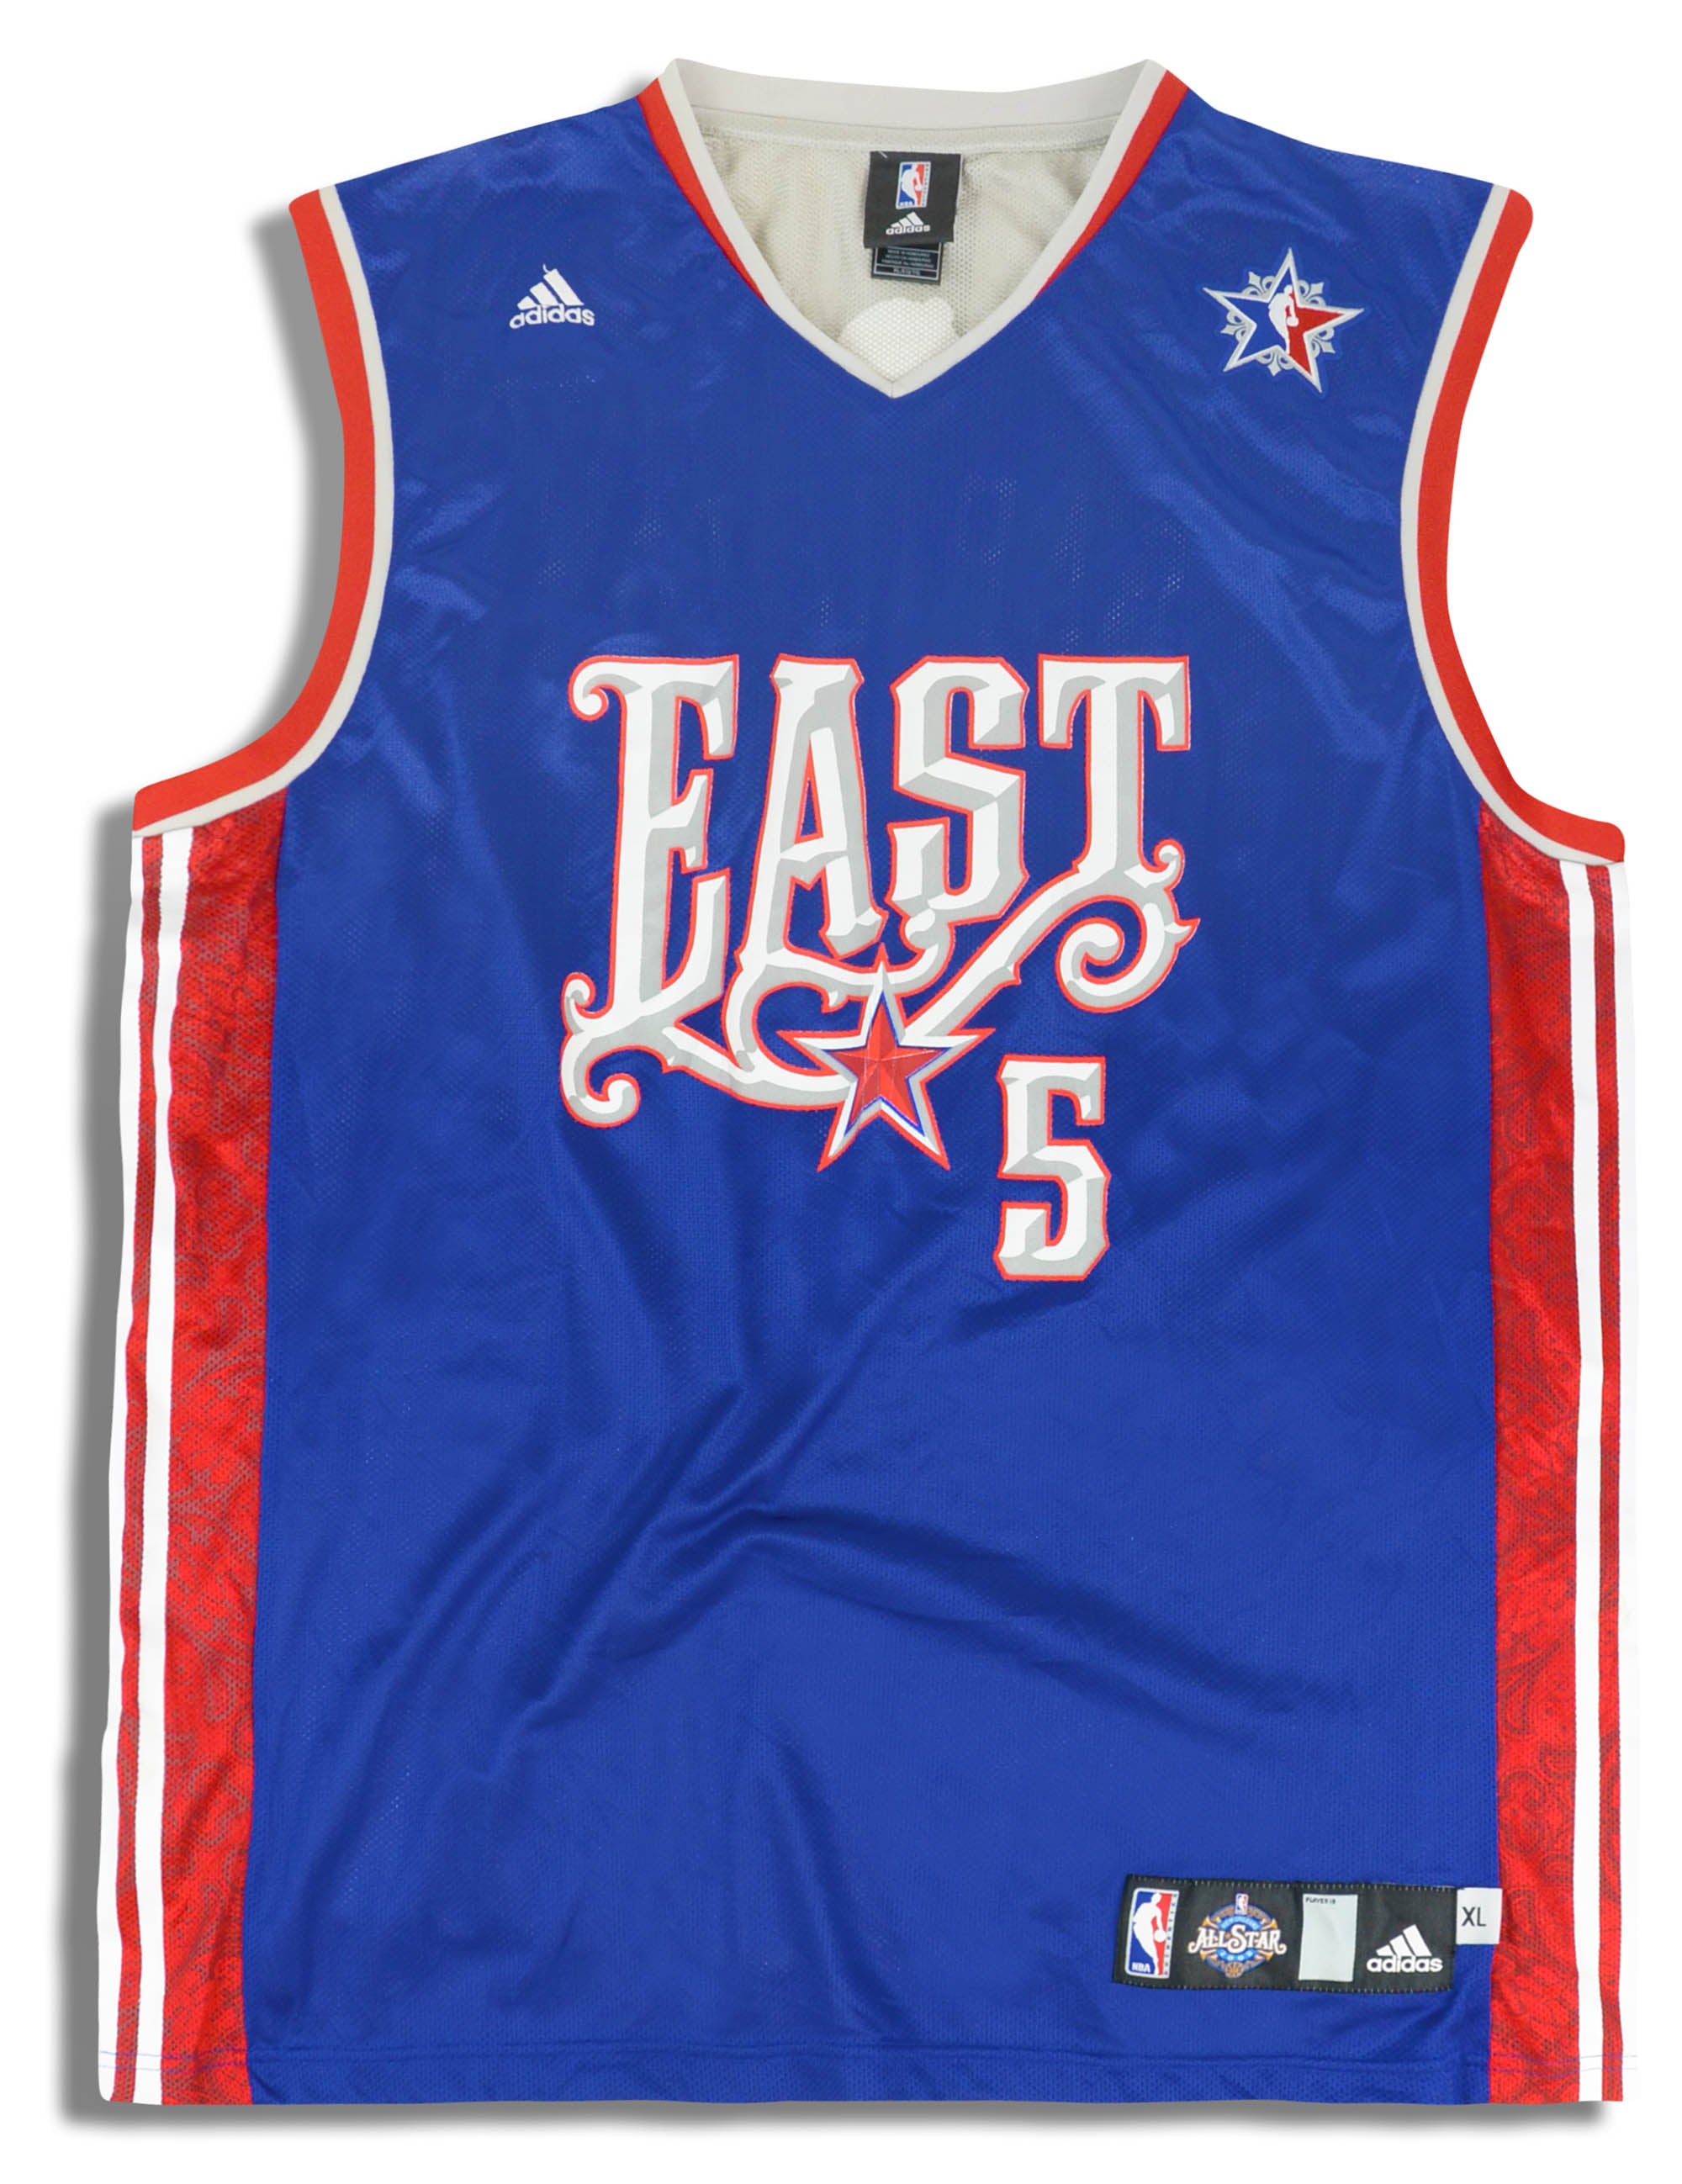 East beats West 134-128 in 2008 NBA All-Star game 